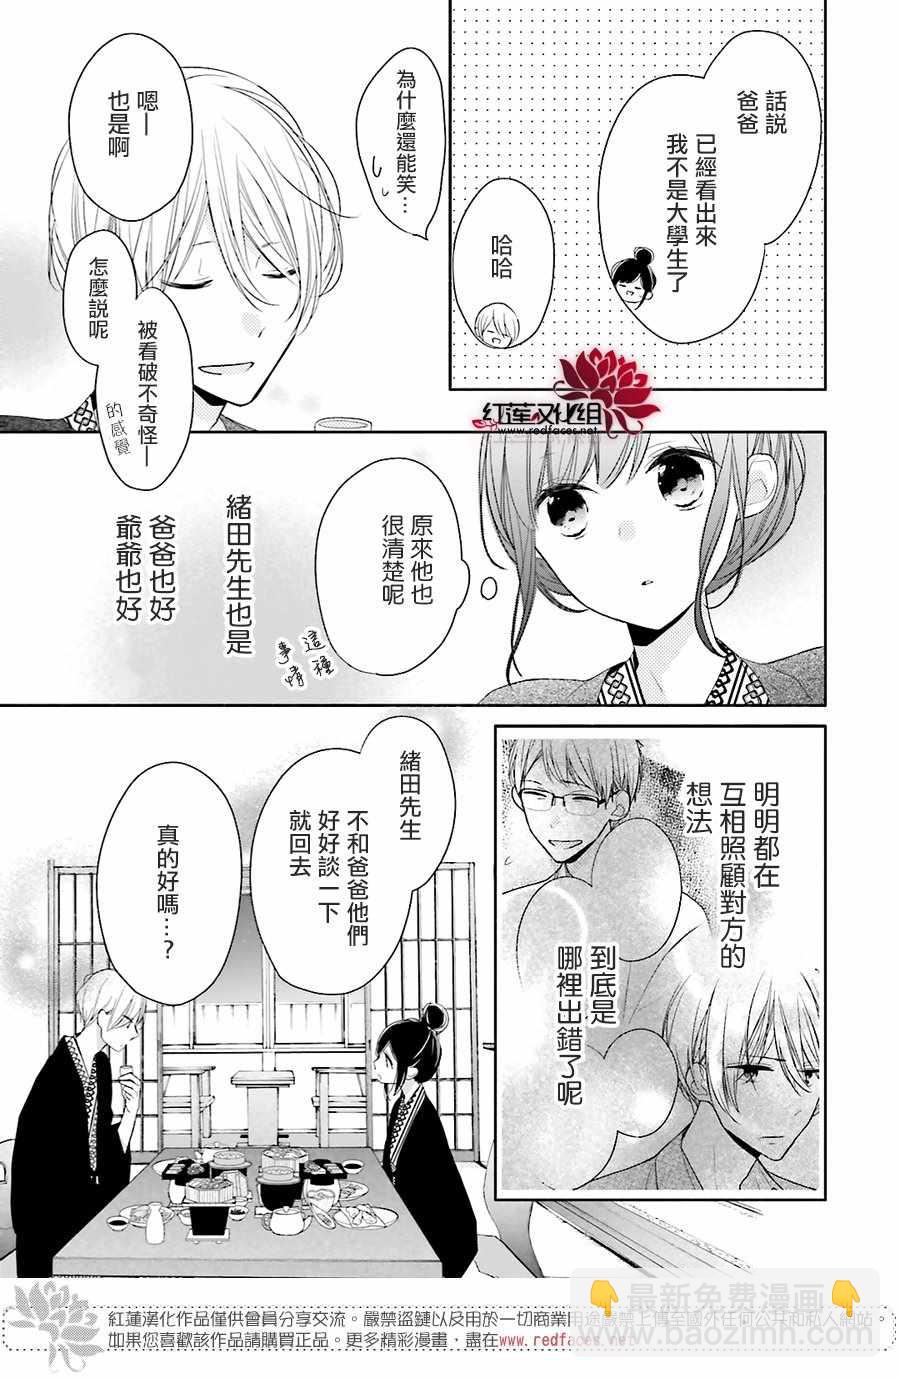 If given a second chance - 11話 - 3